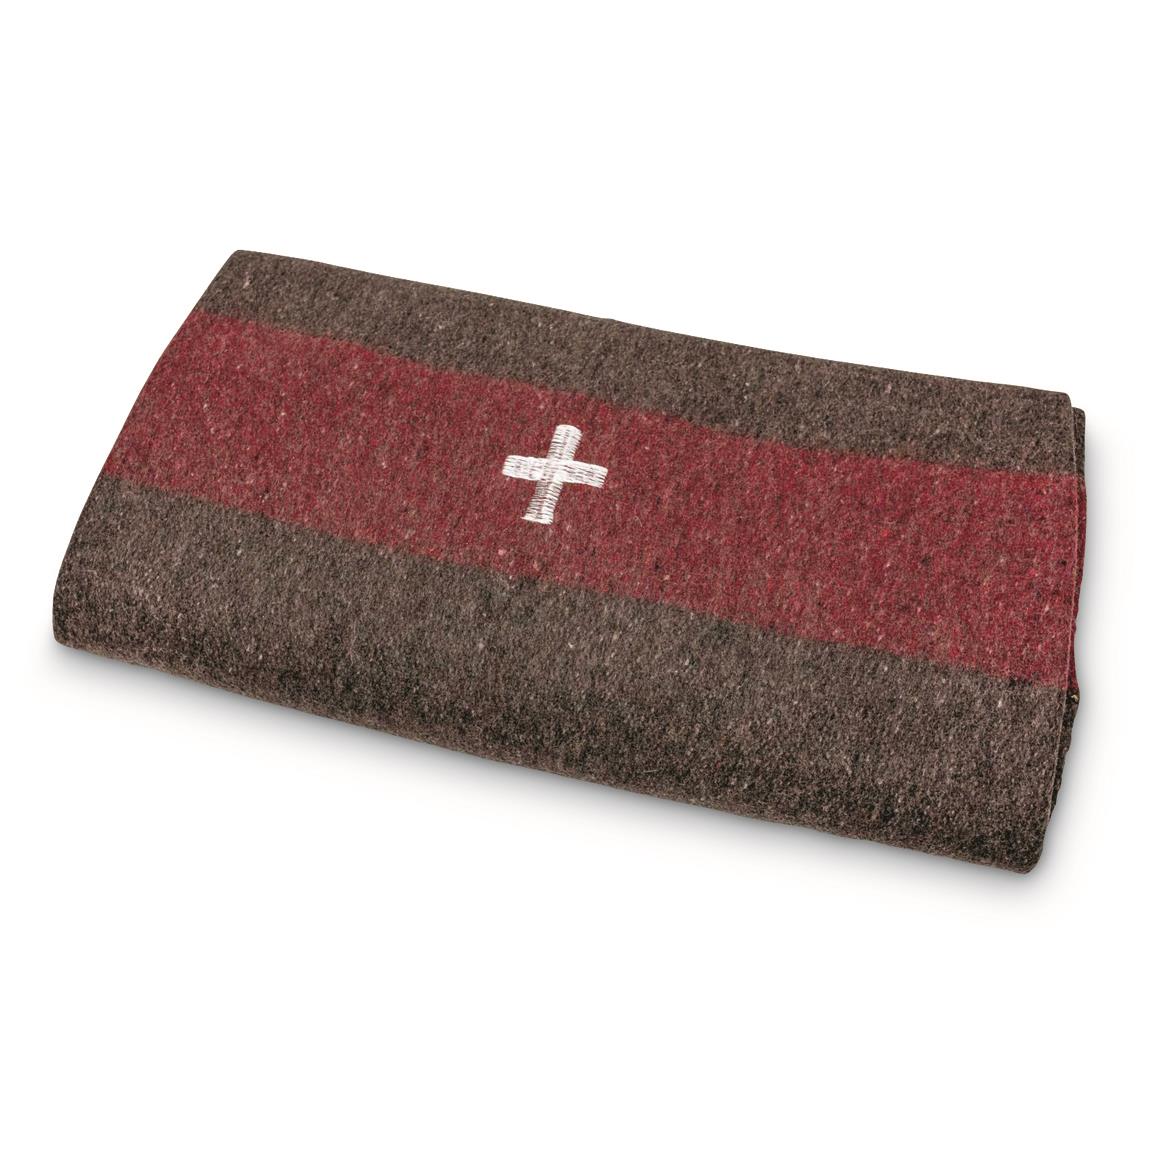 Swiss Link Classic Wool Blanket, Reproduction, Swiss